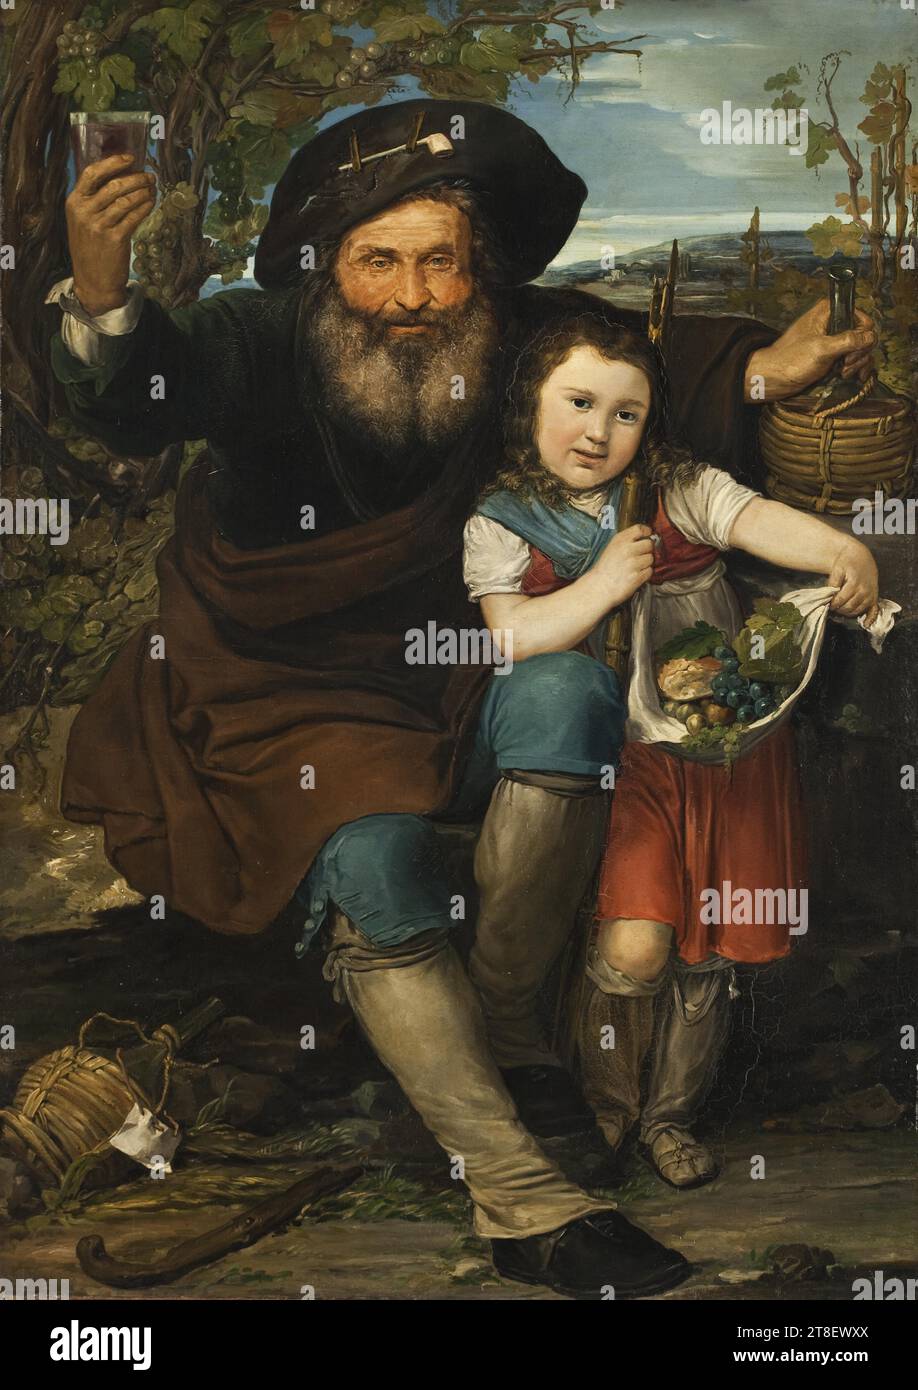 Italian Wine Grower with his Daughter, Francesco Baratta, 1820 - 1838, Painting, Genre Painting, Textile, Canvas, Color, Oil paint, Painted, Height 137.3 cm, Width 98.1 cm, Painting, European, Modernity (1800 - 1914 Stock Photo